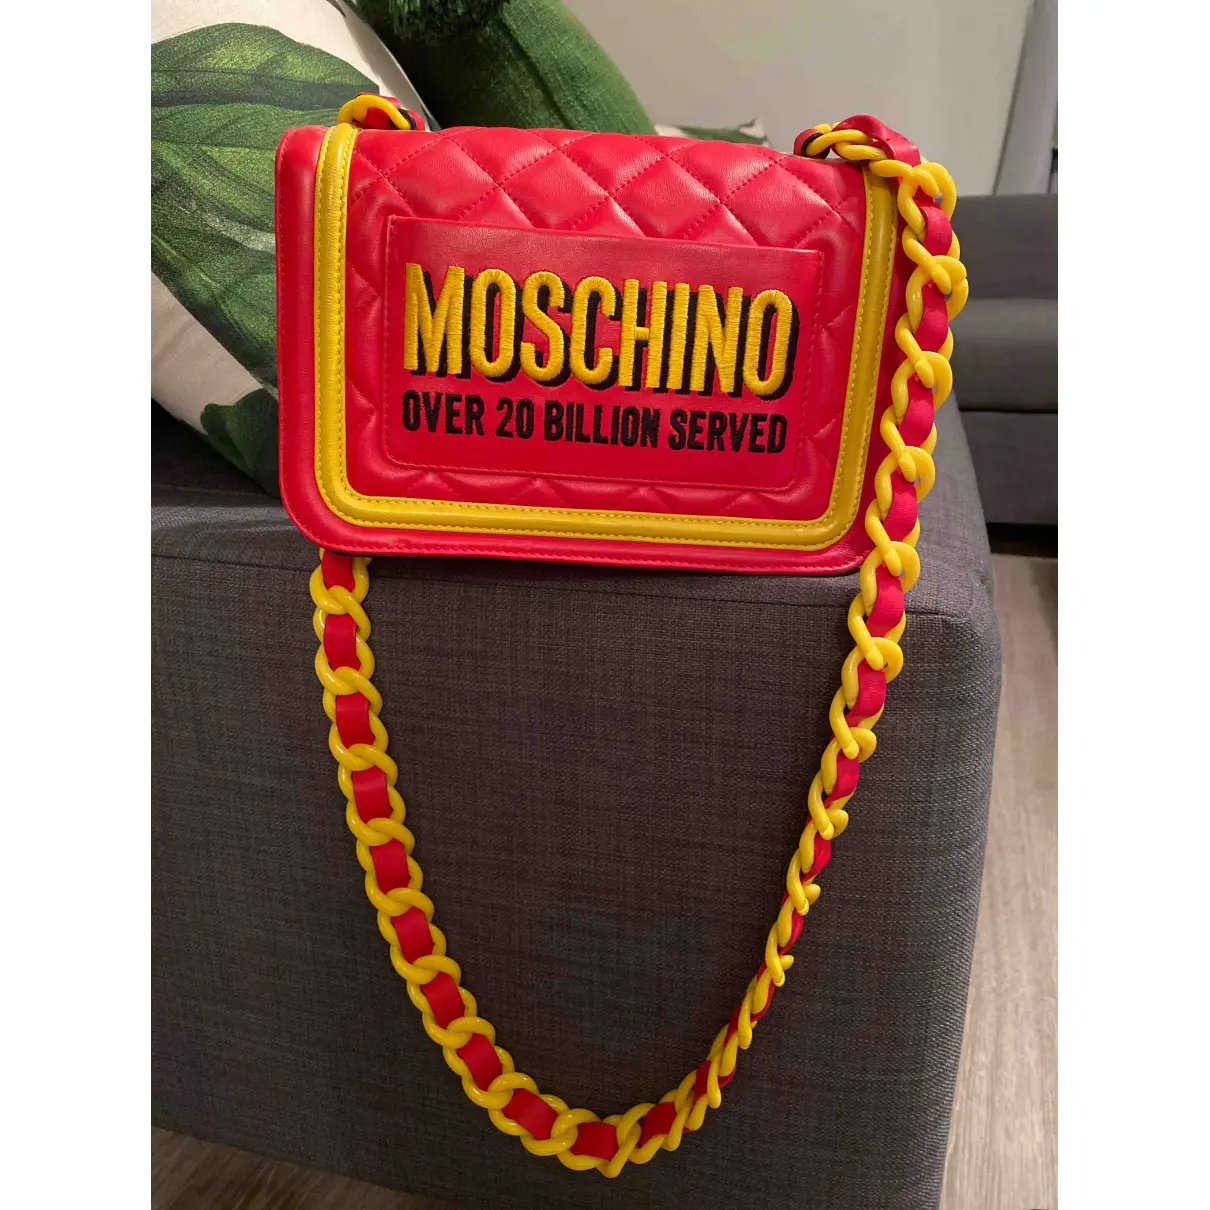 Buy Moschino Leather bag online